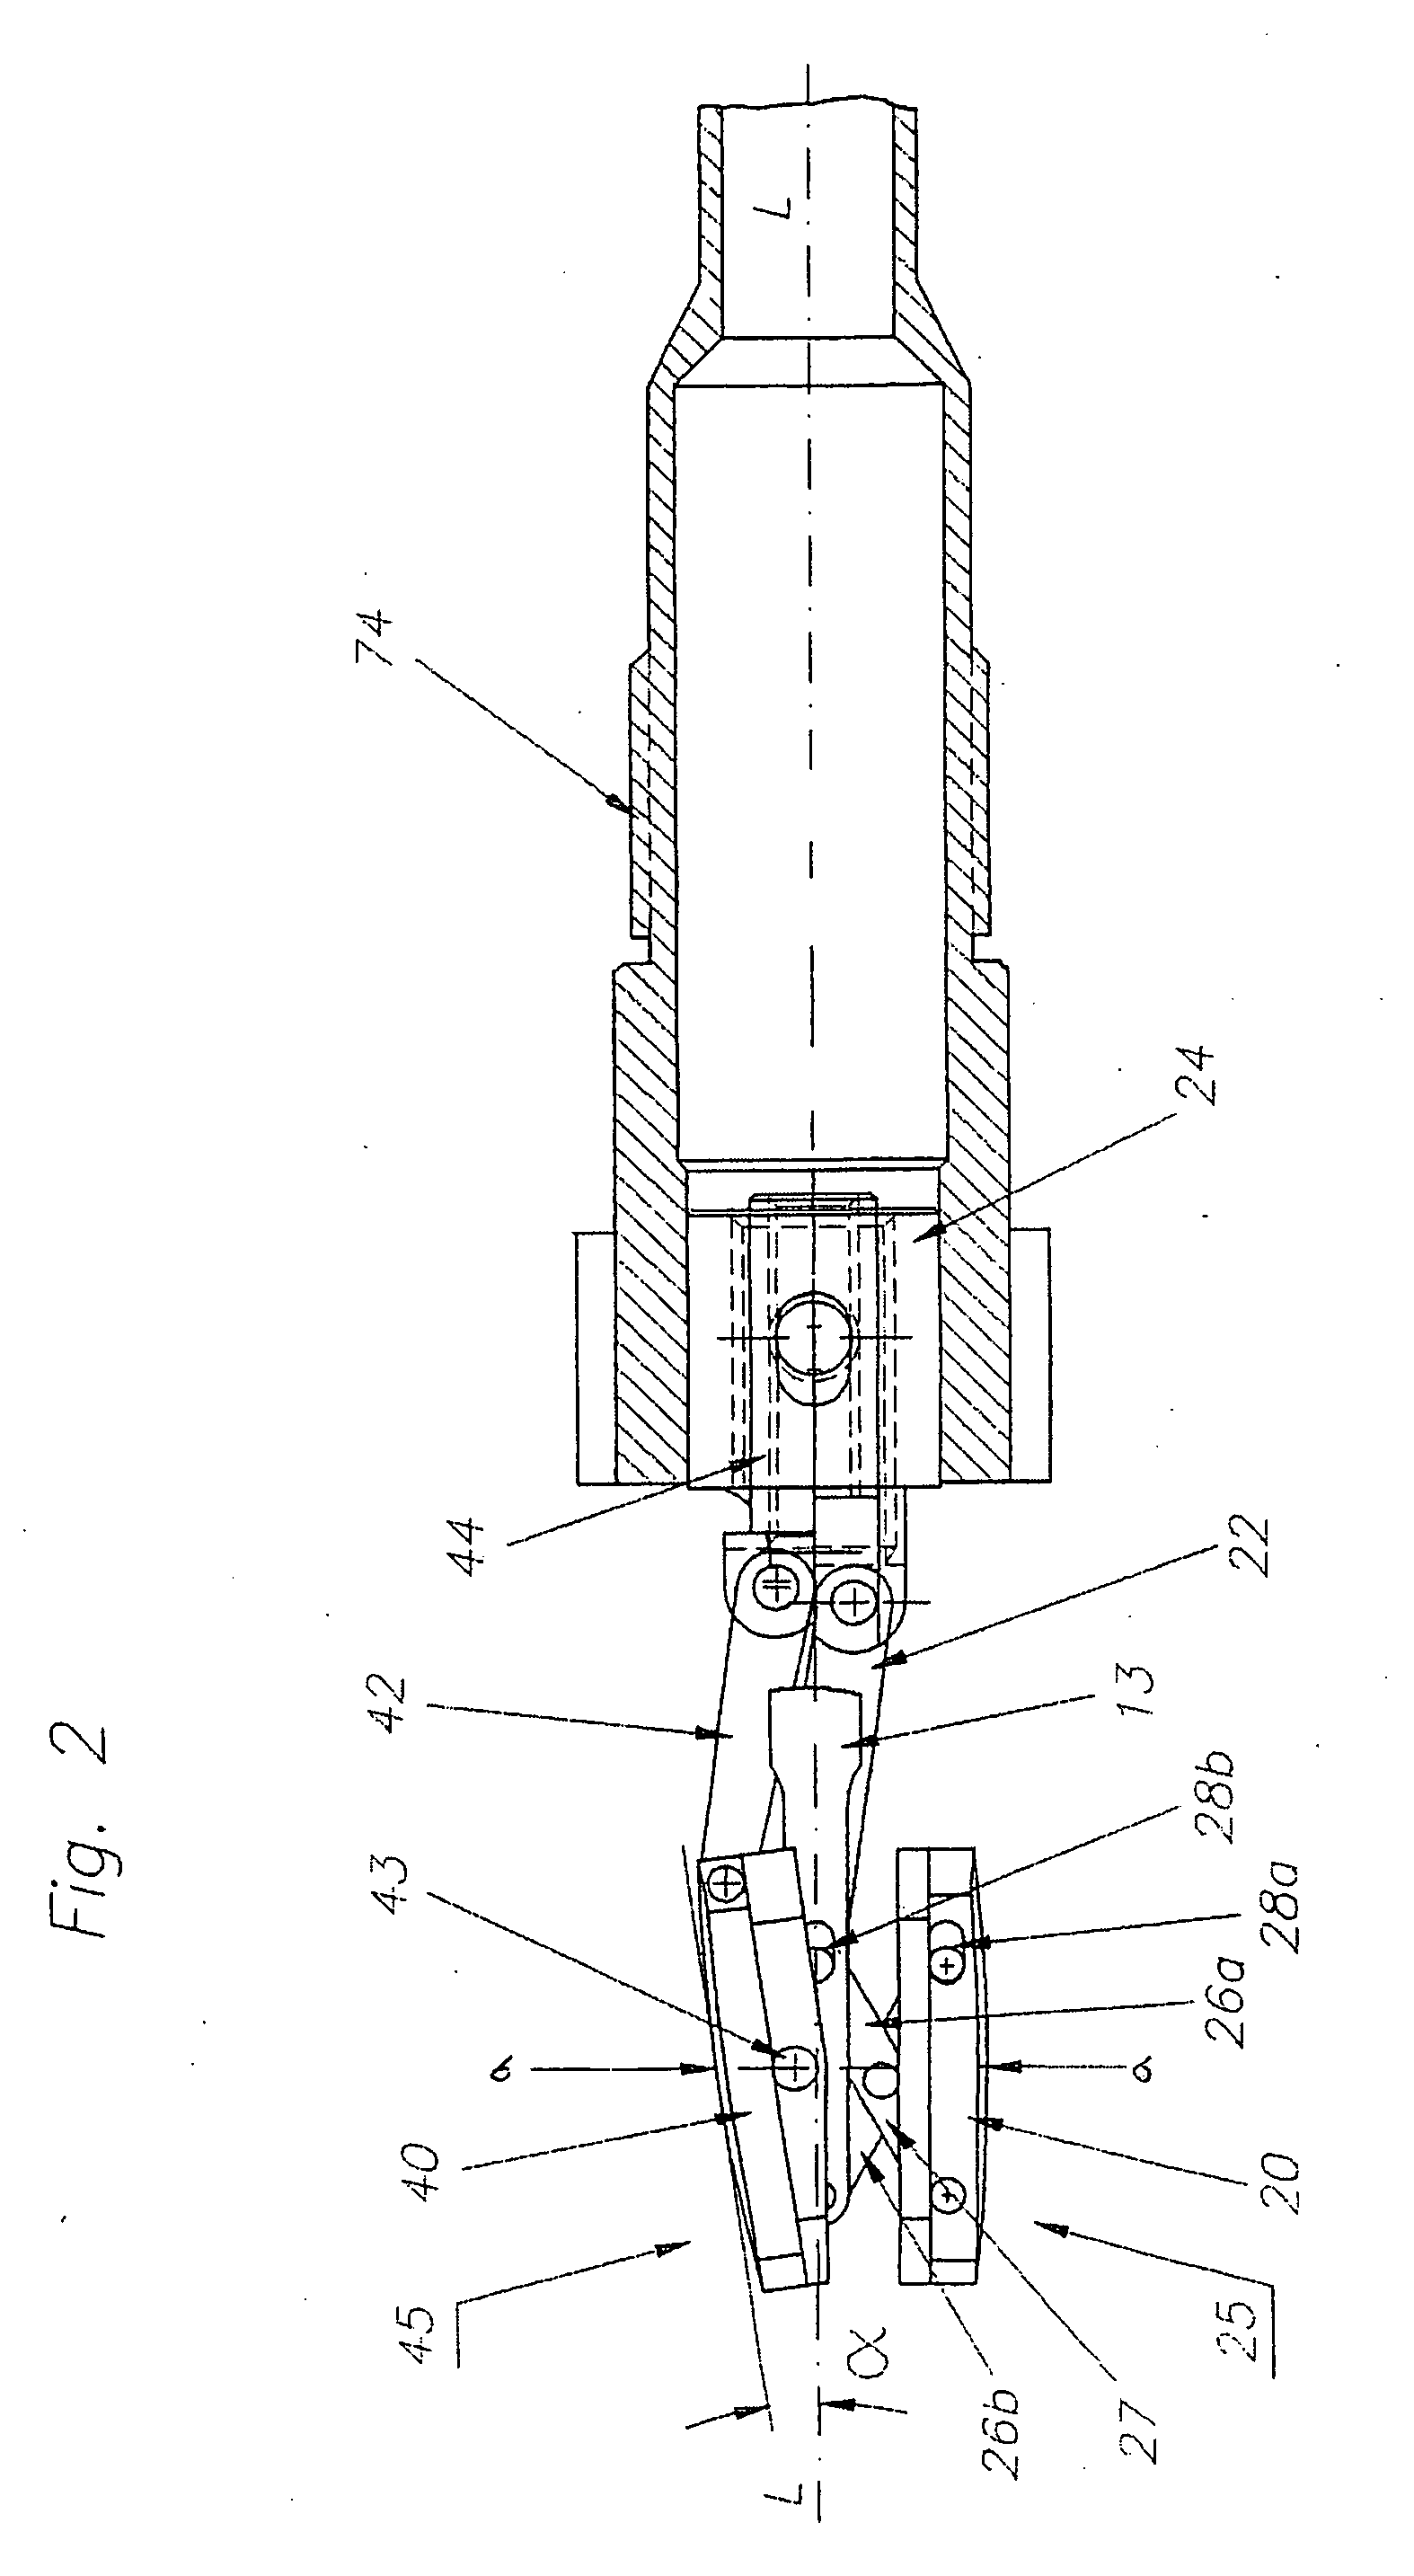 Surgical instrument to measure an intervertebral space